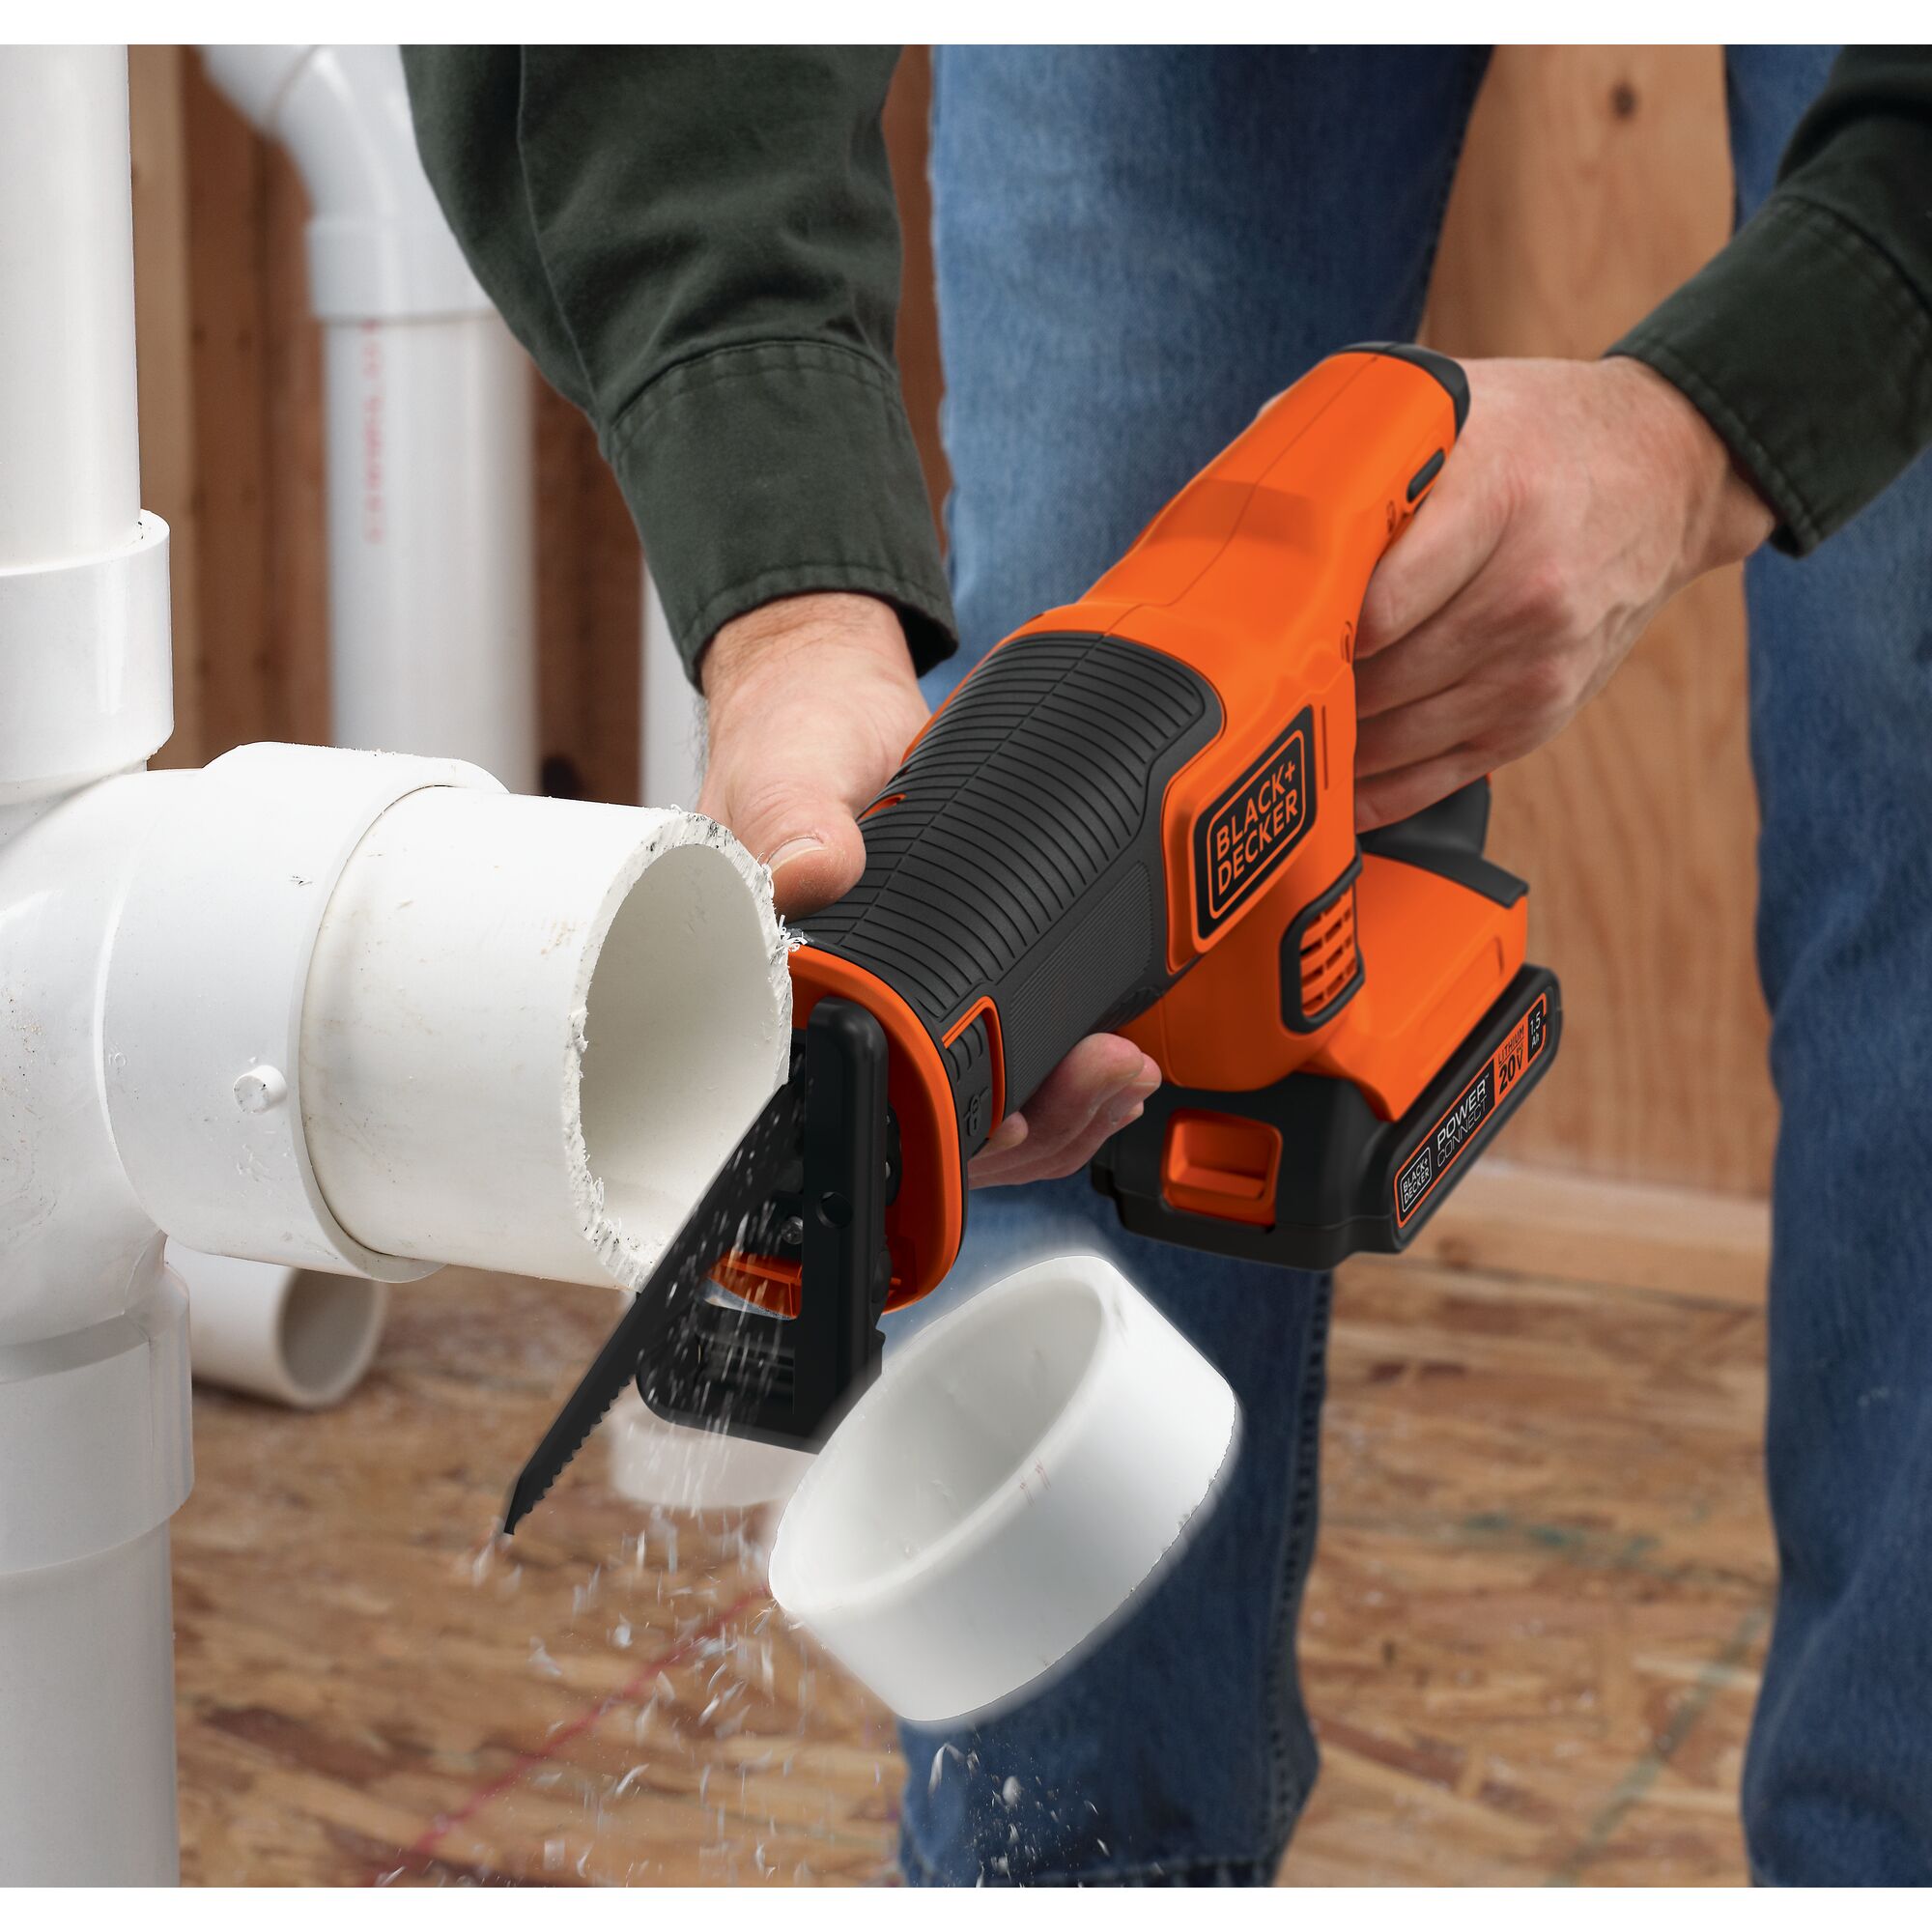 20 volt MAX lithium ion 4 tool combo kit: drill driver, circular saw, reciprocating saw and work light being used by a person to view under stairs. 